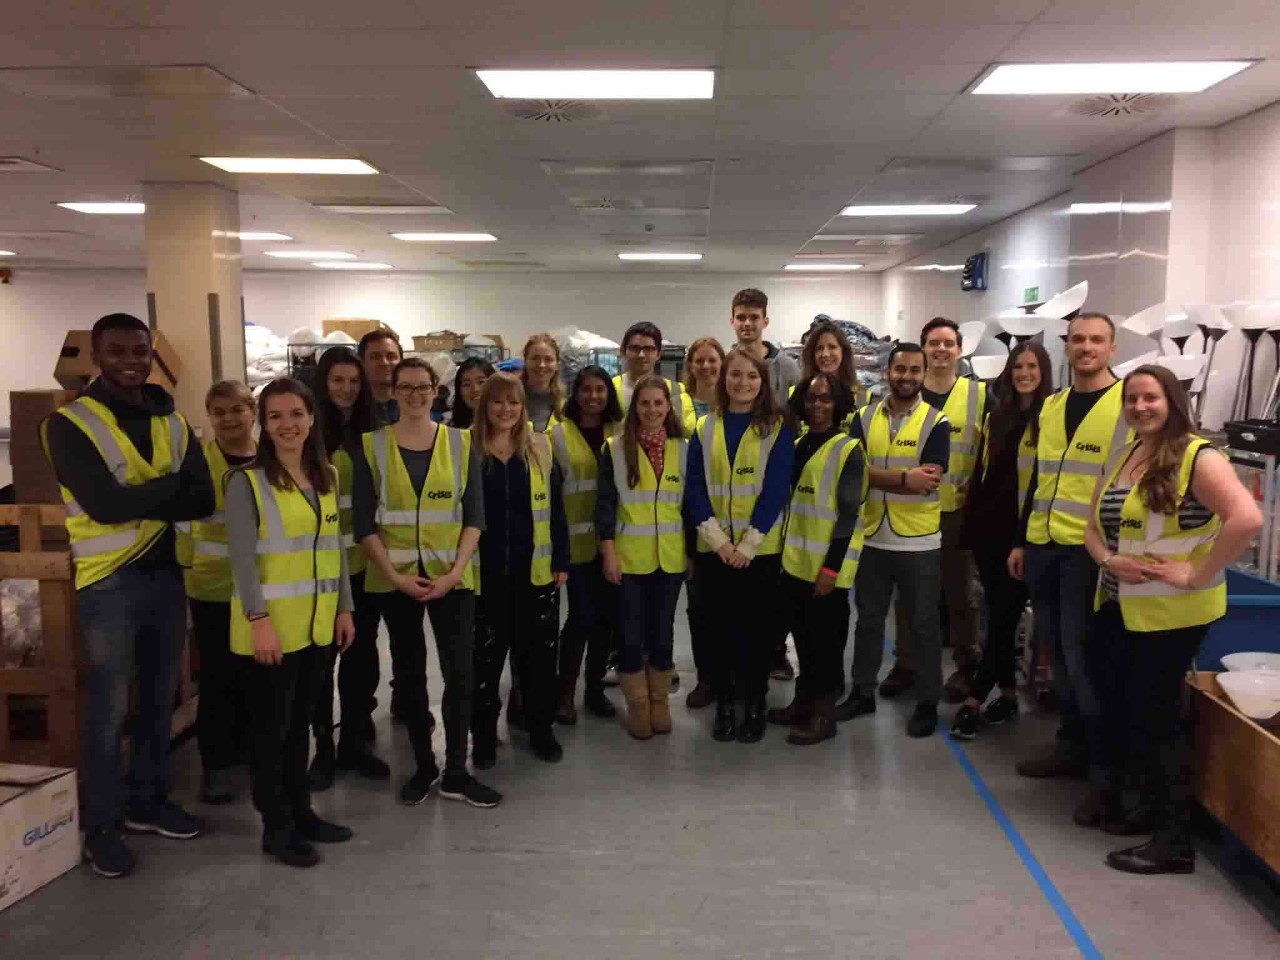 JLL employees volunteered at crisis to help the homeless during Christmas